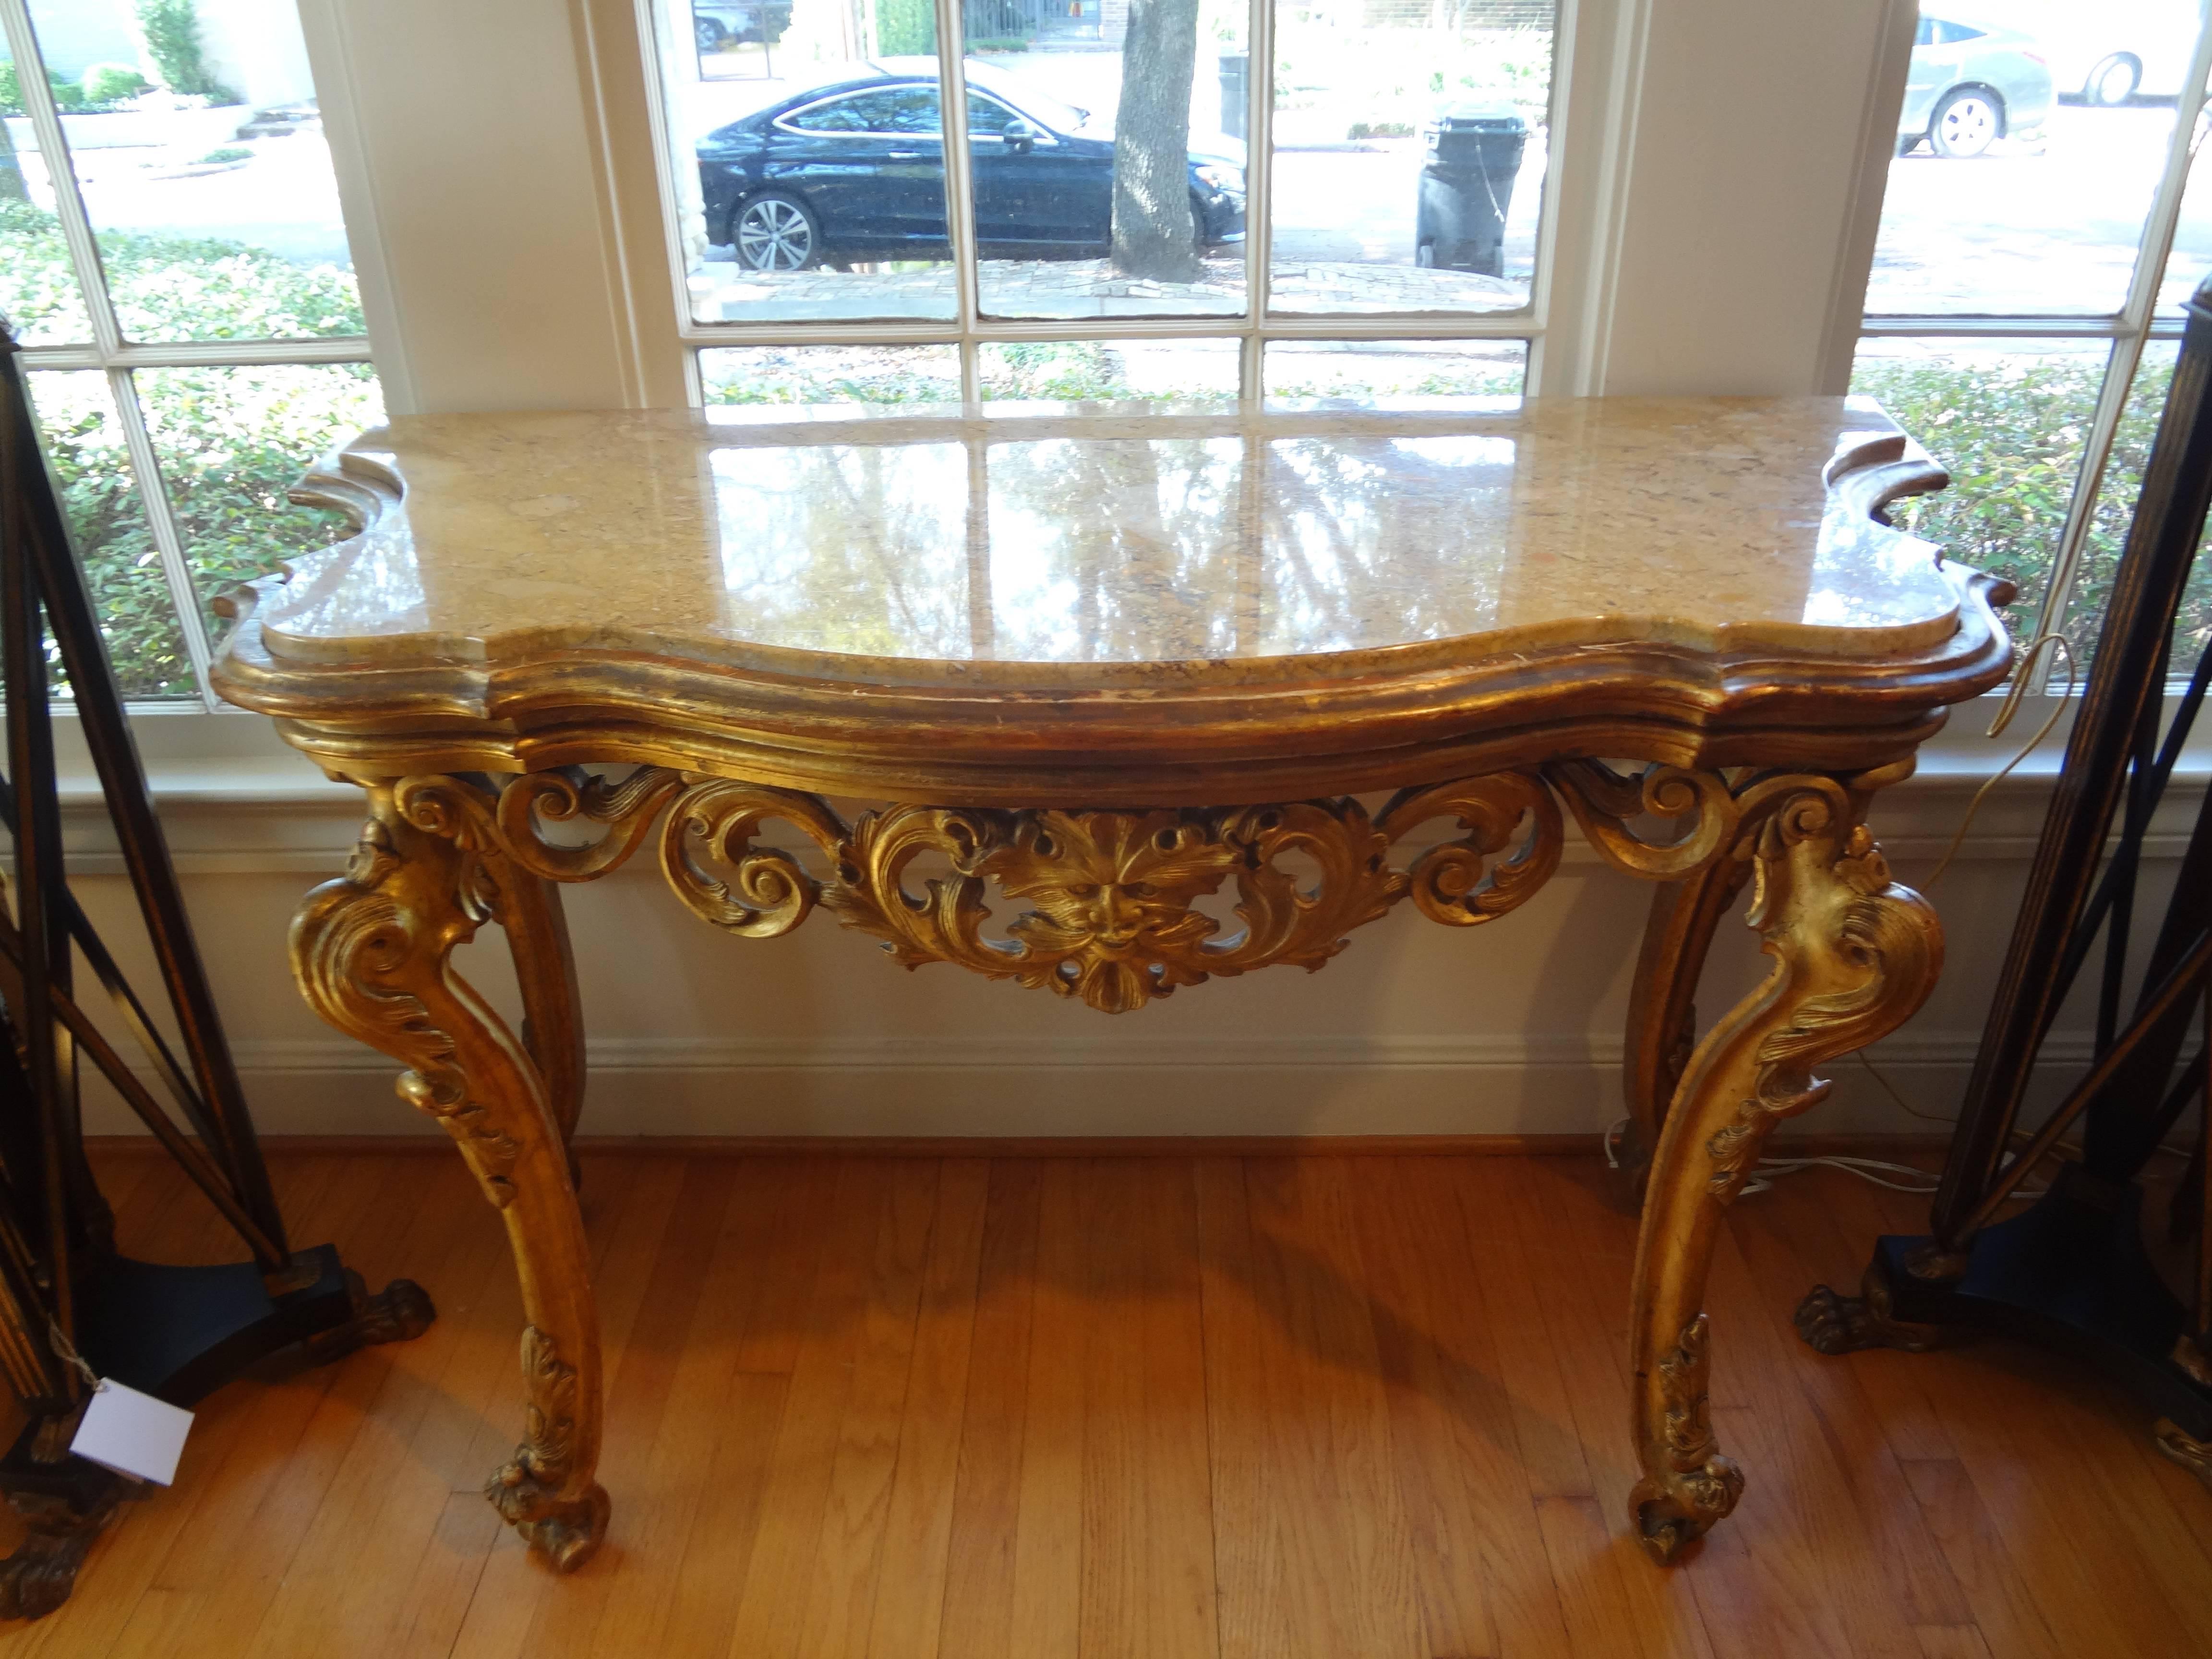 18th century Venetian giltwood console table with marble top.
Gorgeous antique Italian Louis XIV freestanding gilt wood console table from Venice with original marble top.
This fabulous antique Italian gilt console or demilune has a central mask